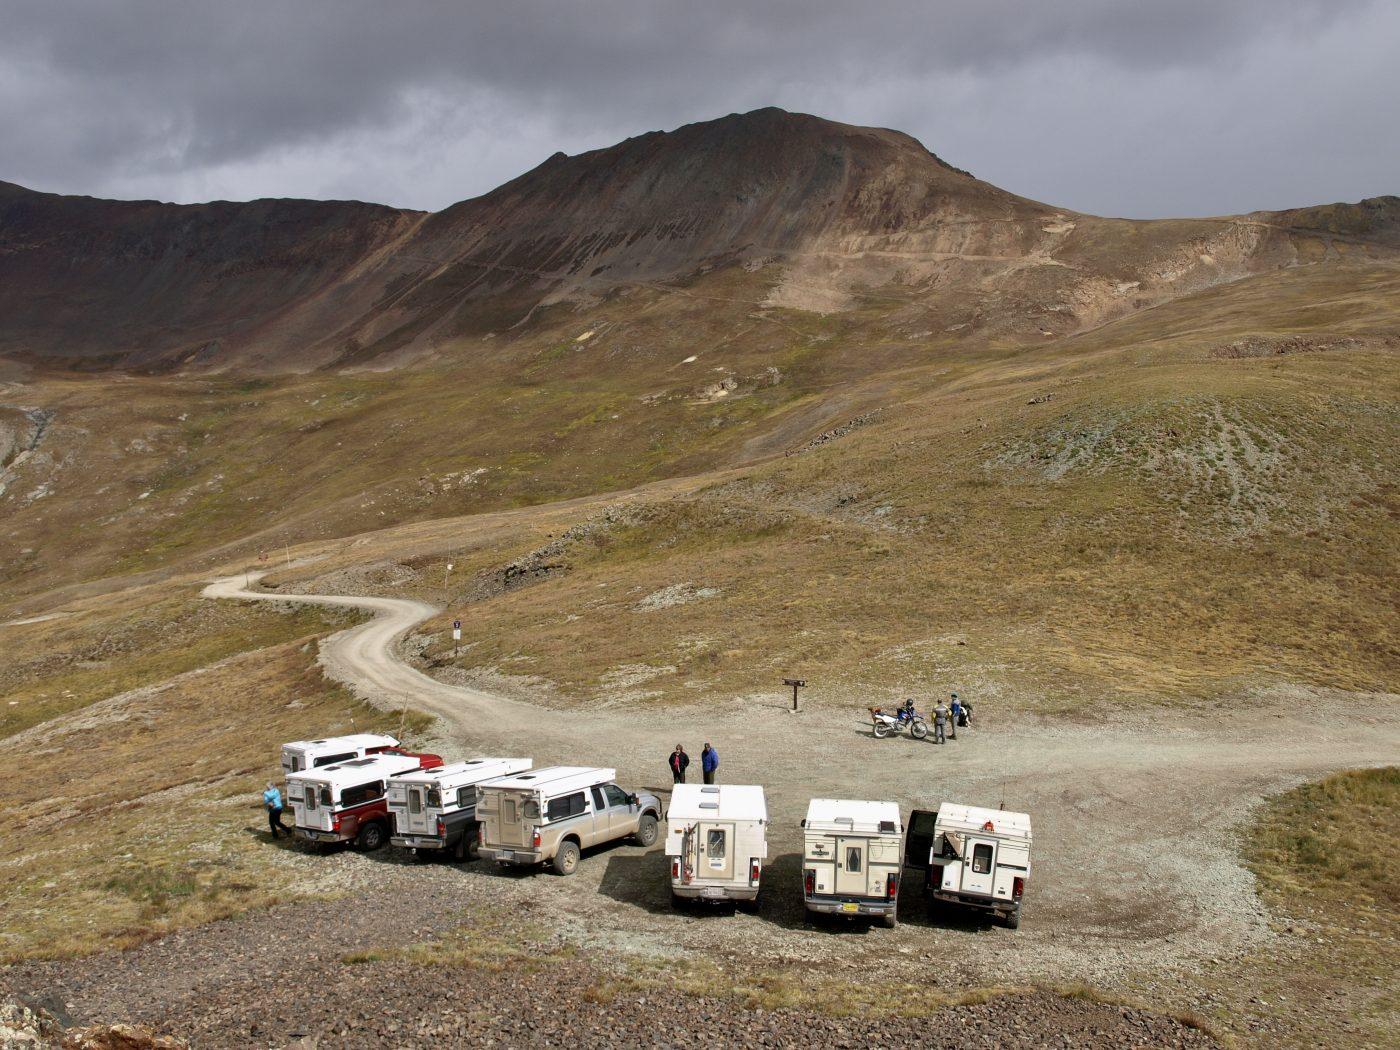 7 four wheel campers in lined up in the mountains